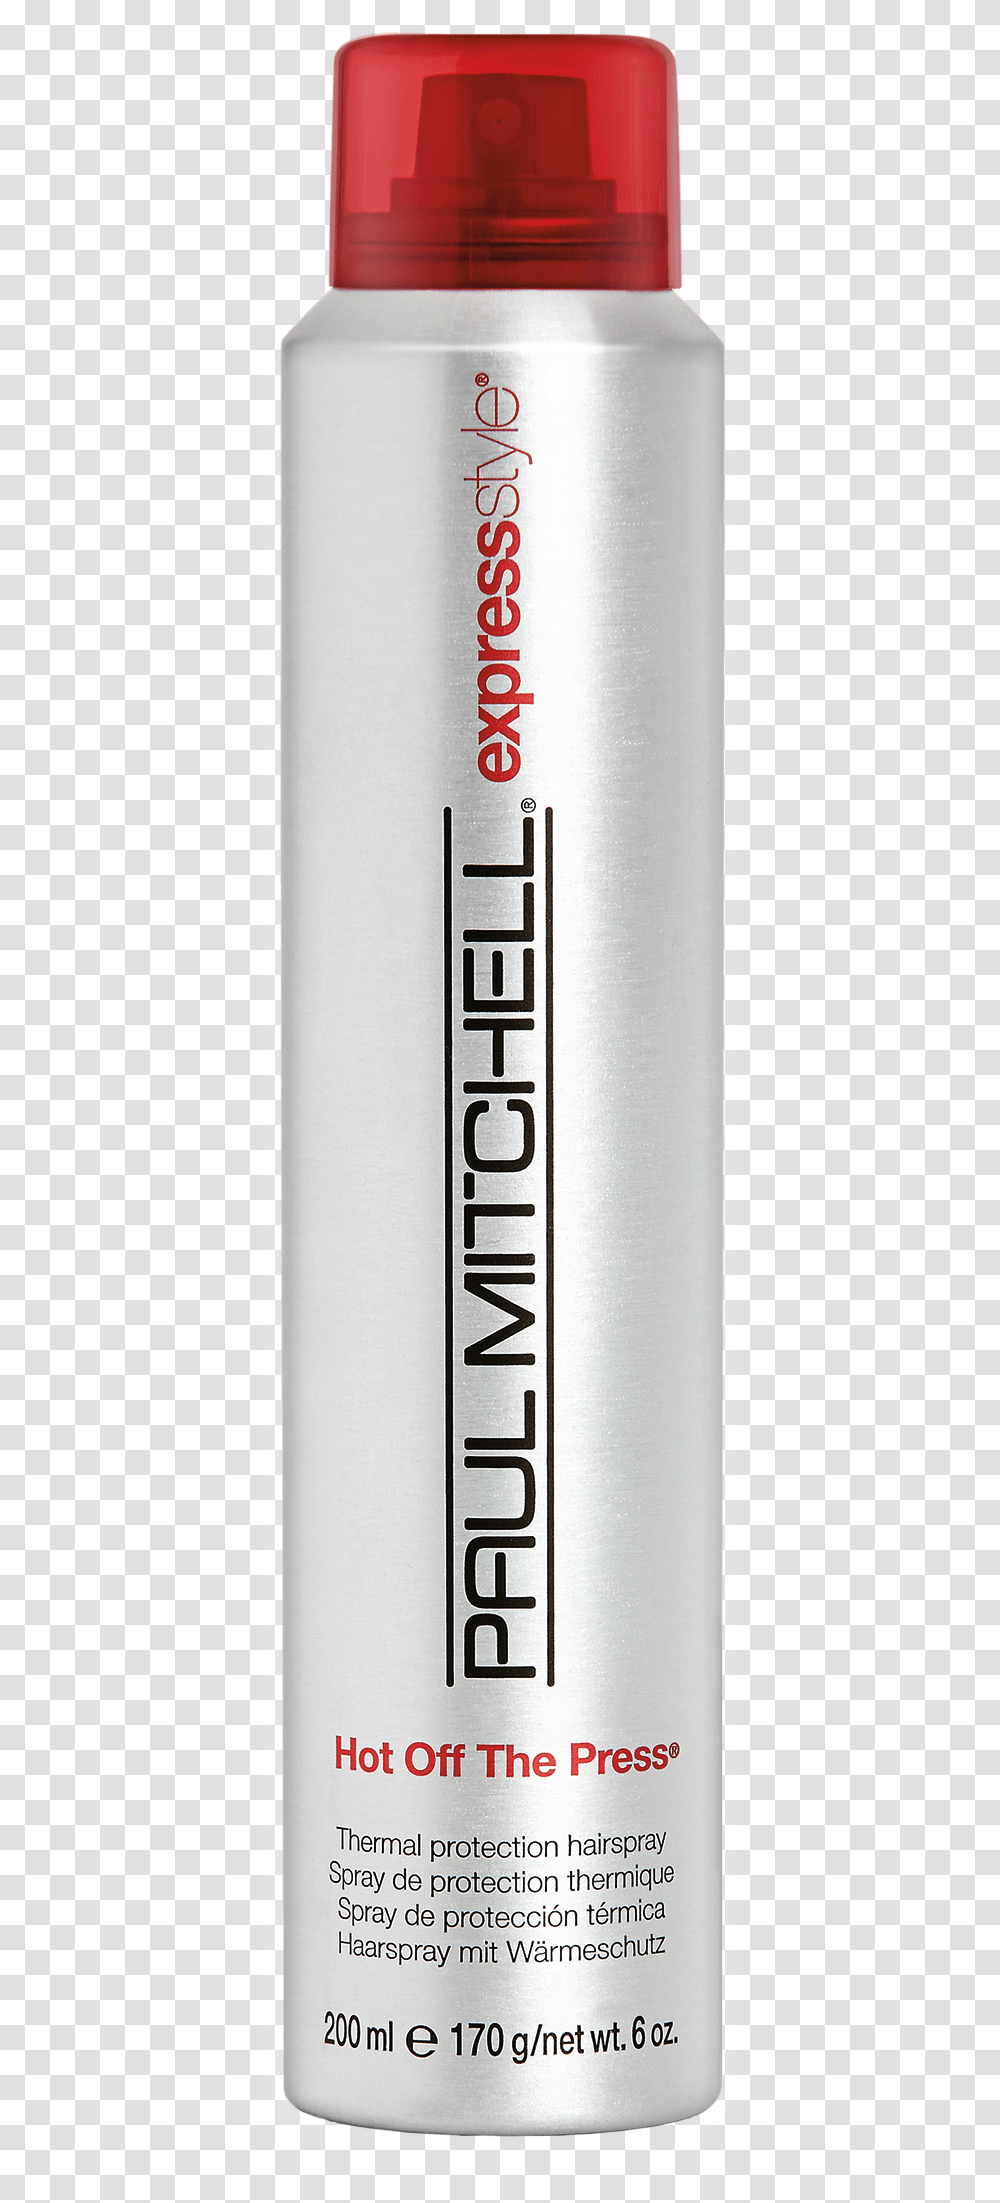 Paul Mitchell Hot Off The Press Thermal Protection Paul Mitchell Heat Protector, Aluminium, Bottle, Tin, Can Transparent Png